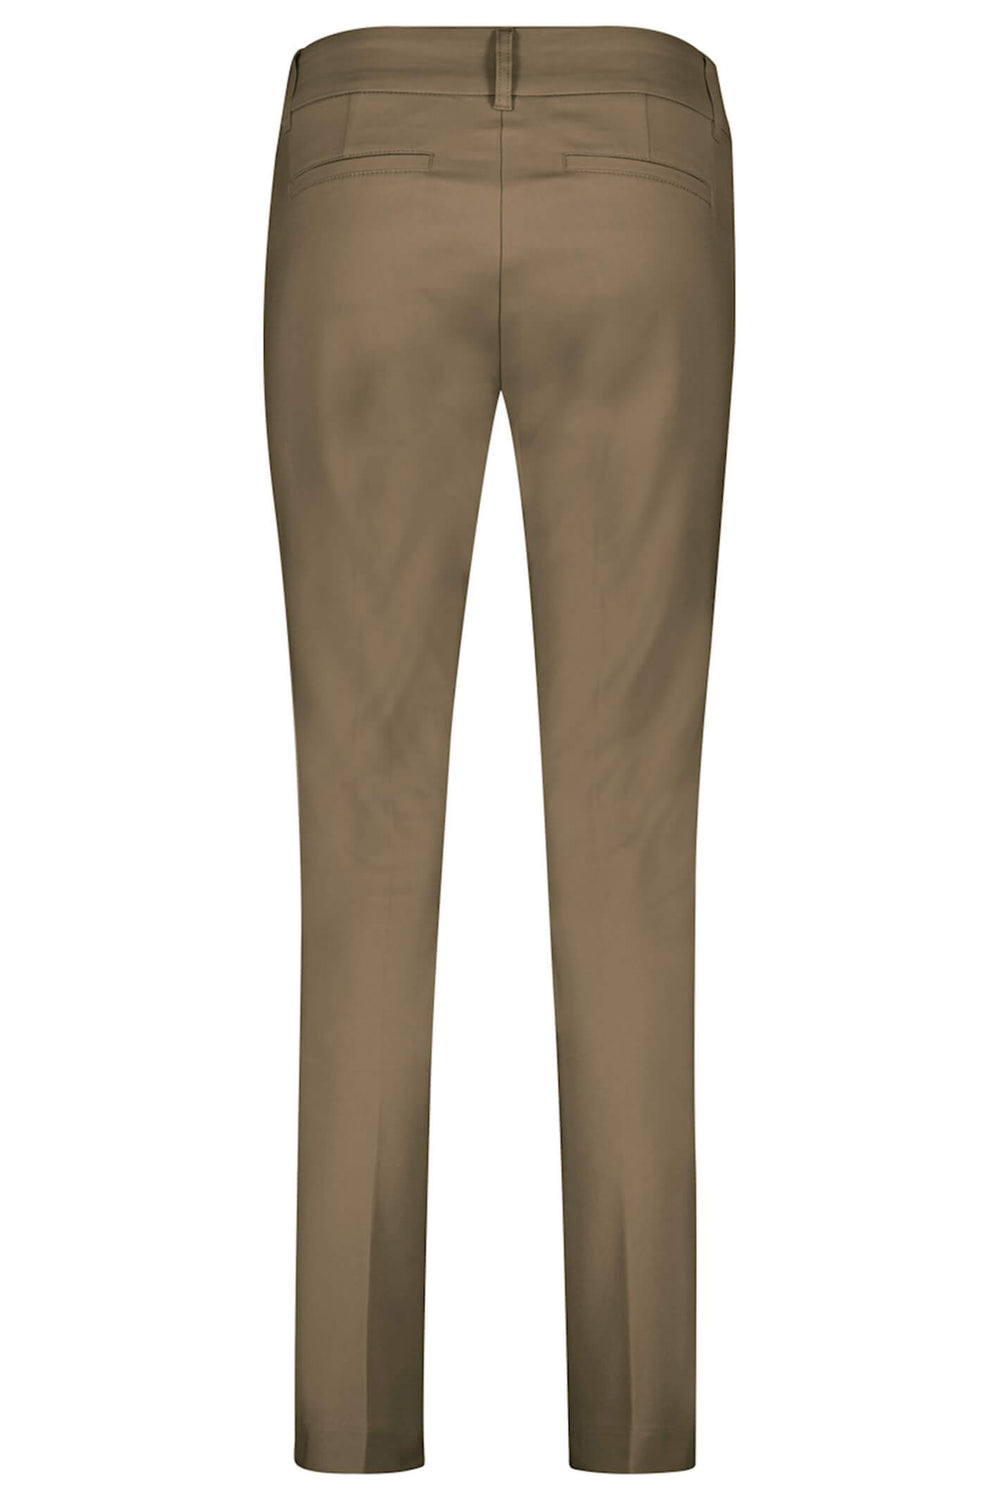 Red Button SRB4122 Diana Dark Taupe Smart Trouser - Dotique